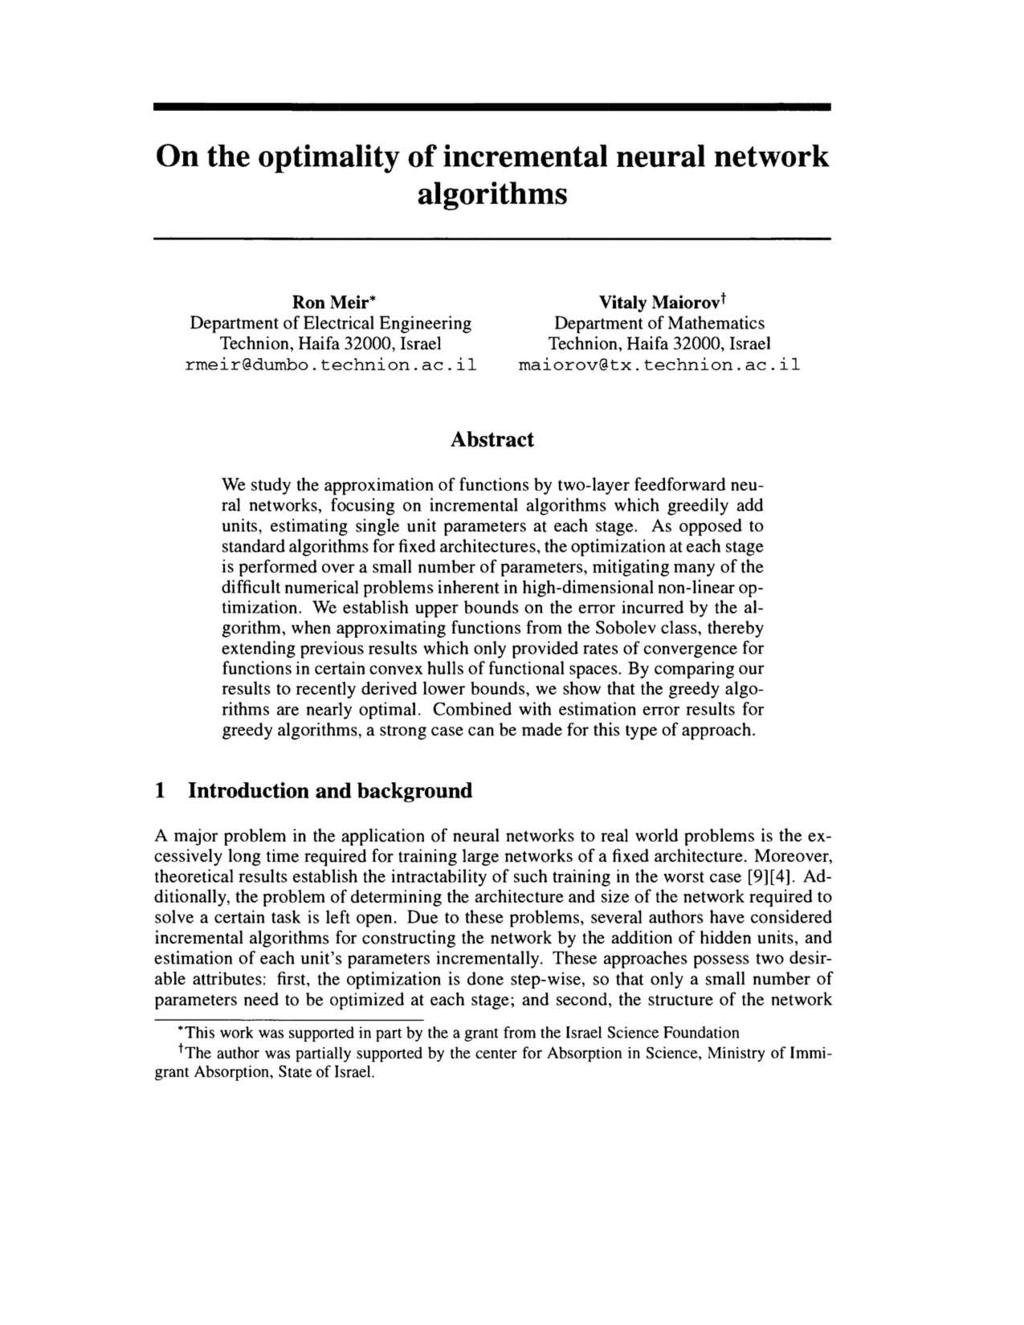 On the optimality of incremental neural network algorithms Ron Meir* Department of Electrical Engineering Technion, Haifa 32000, Israel rmeir@dumbo.technion.ac.